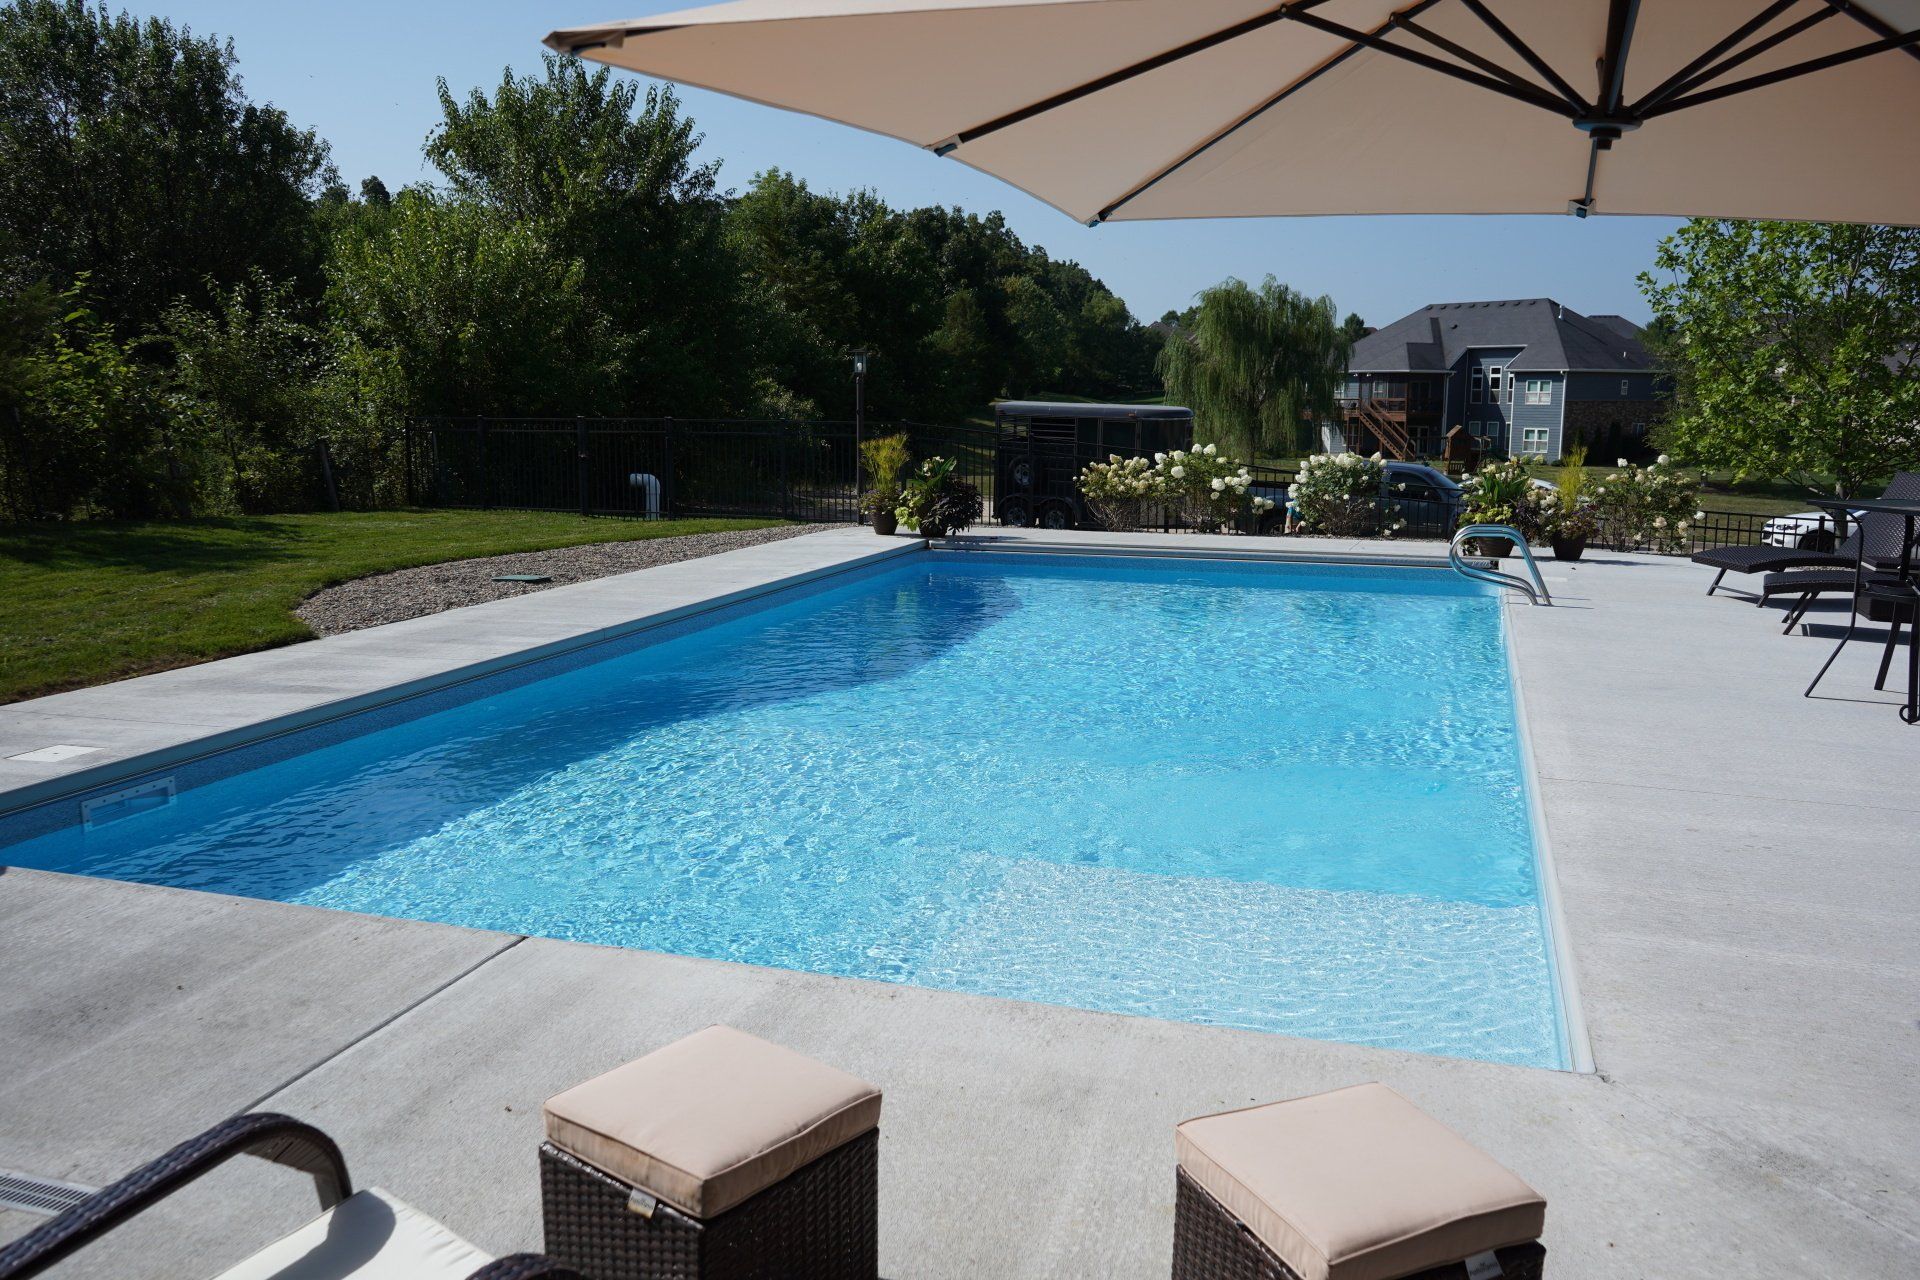 Relax Poolside at Your New Vinyl Liner Inground Pool in Columbia, MO With Peavler Construction.